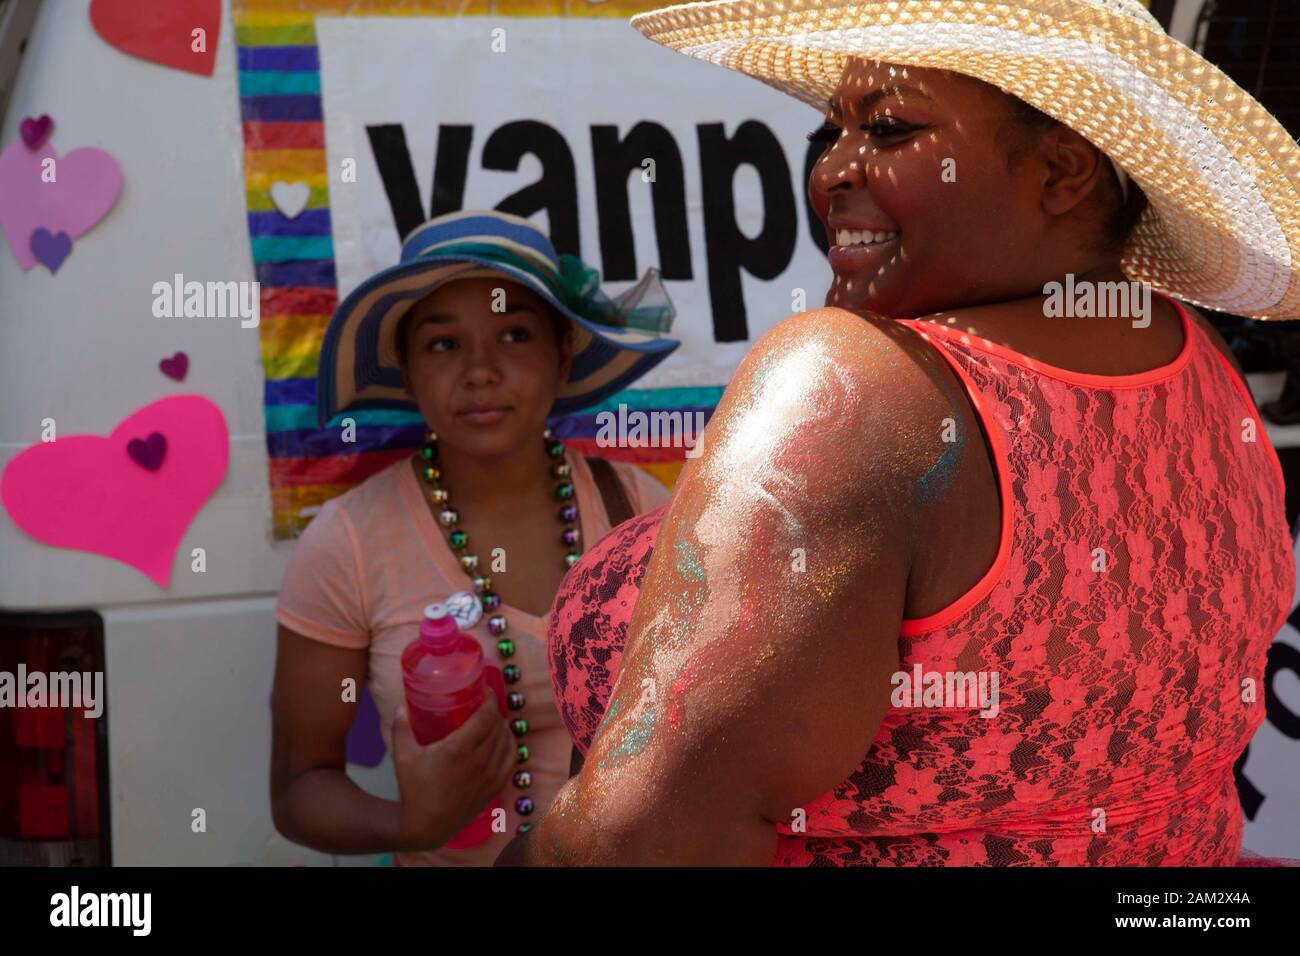 Pride parade participant in sun hat looking at friend in lace tank top, Vancouver Pride Festival 2014, Vancouver, Canada Stock Photo